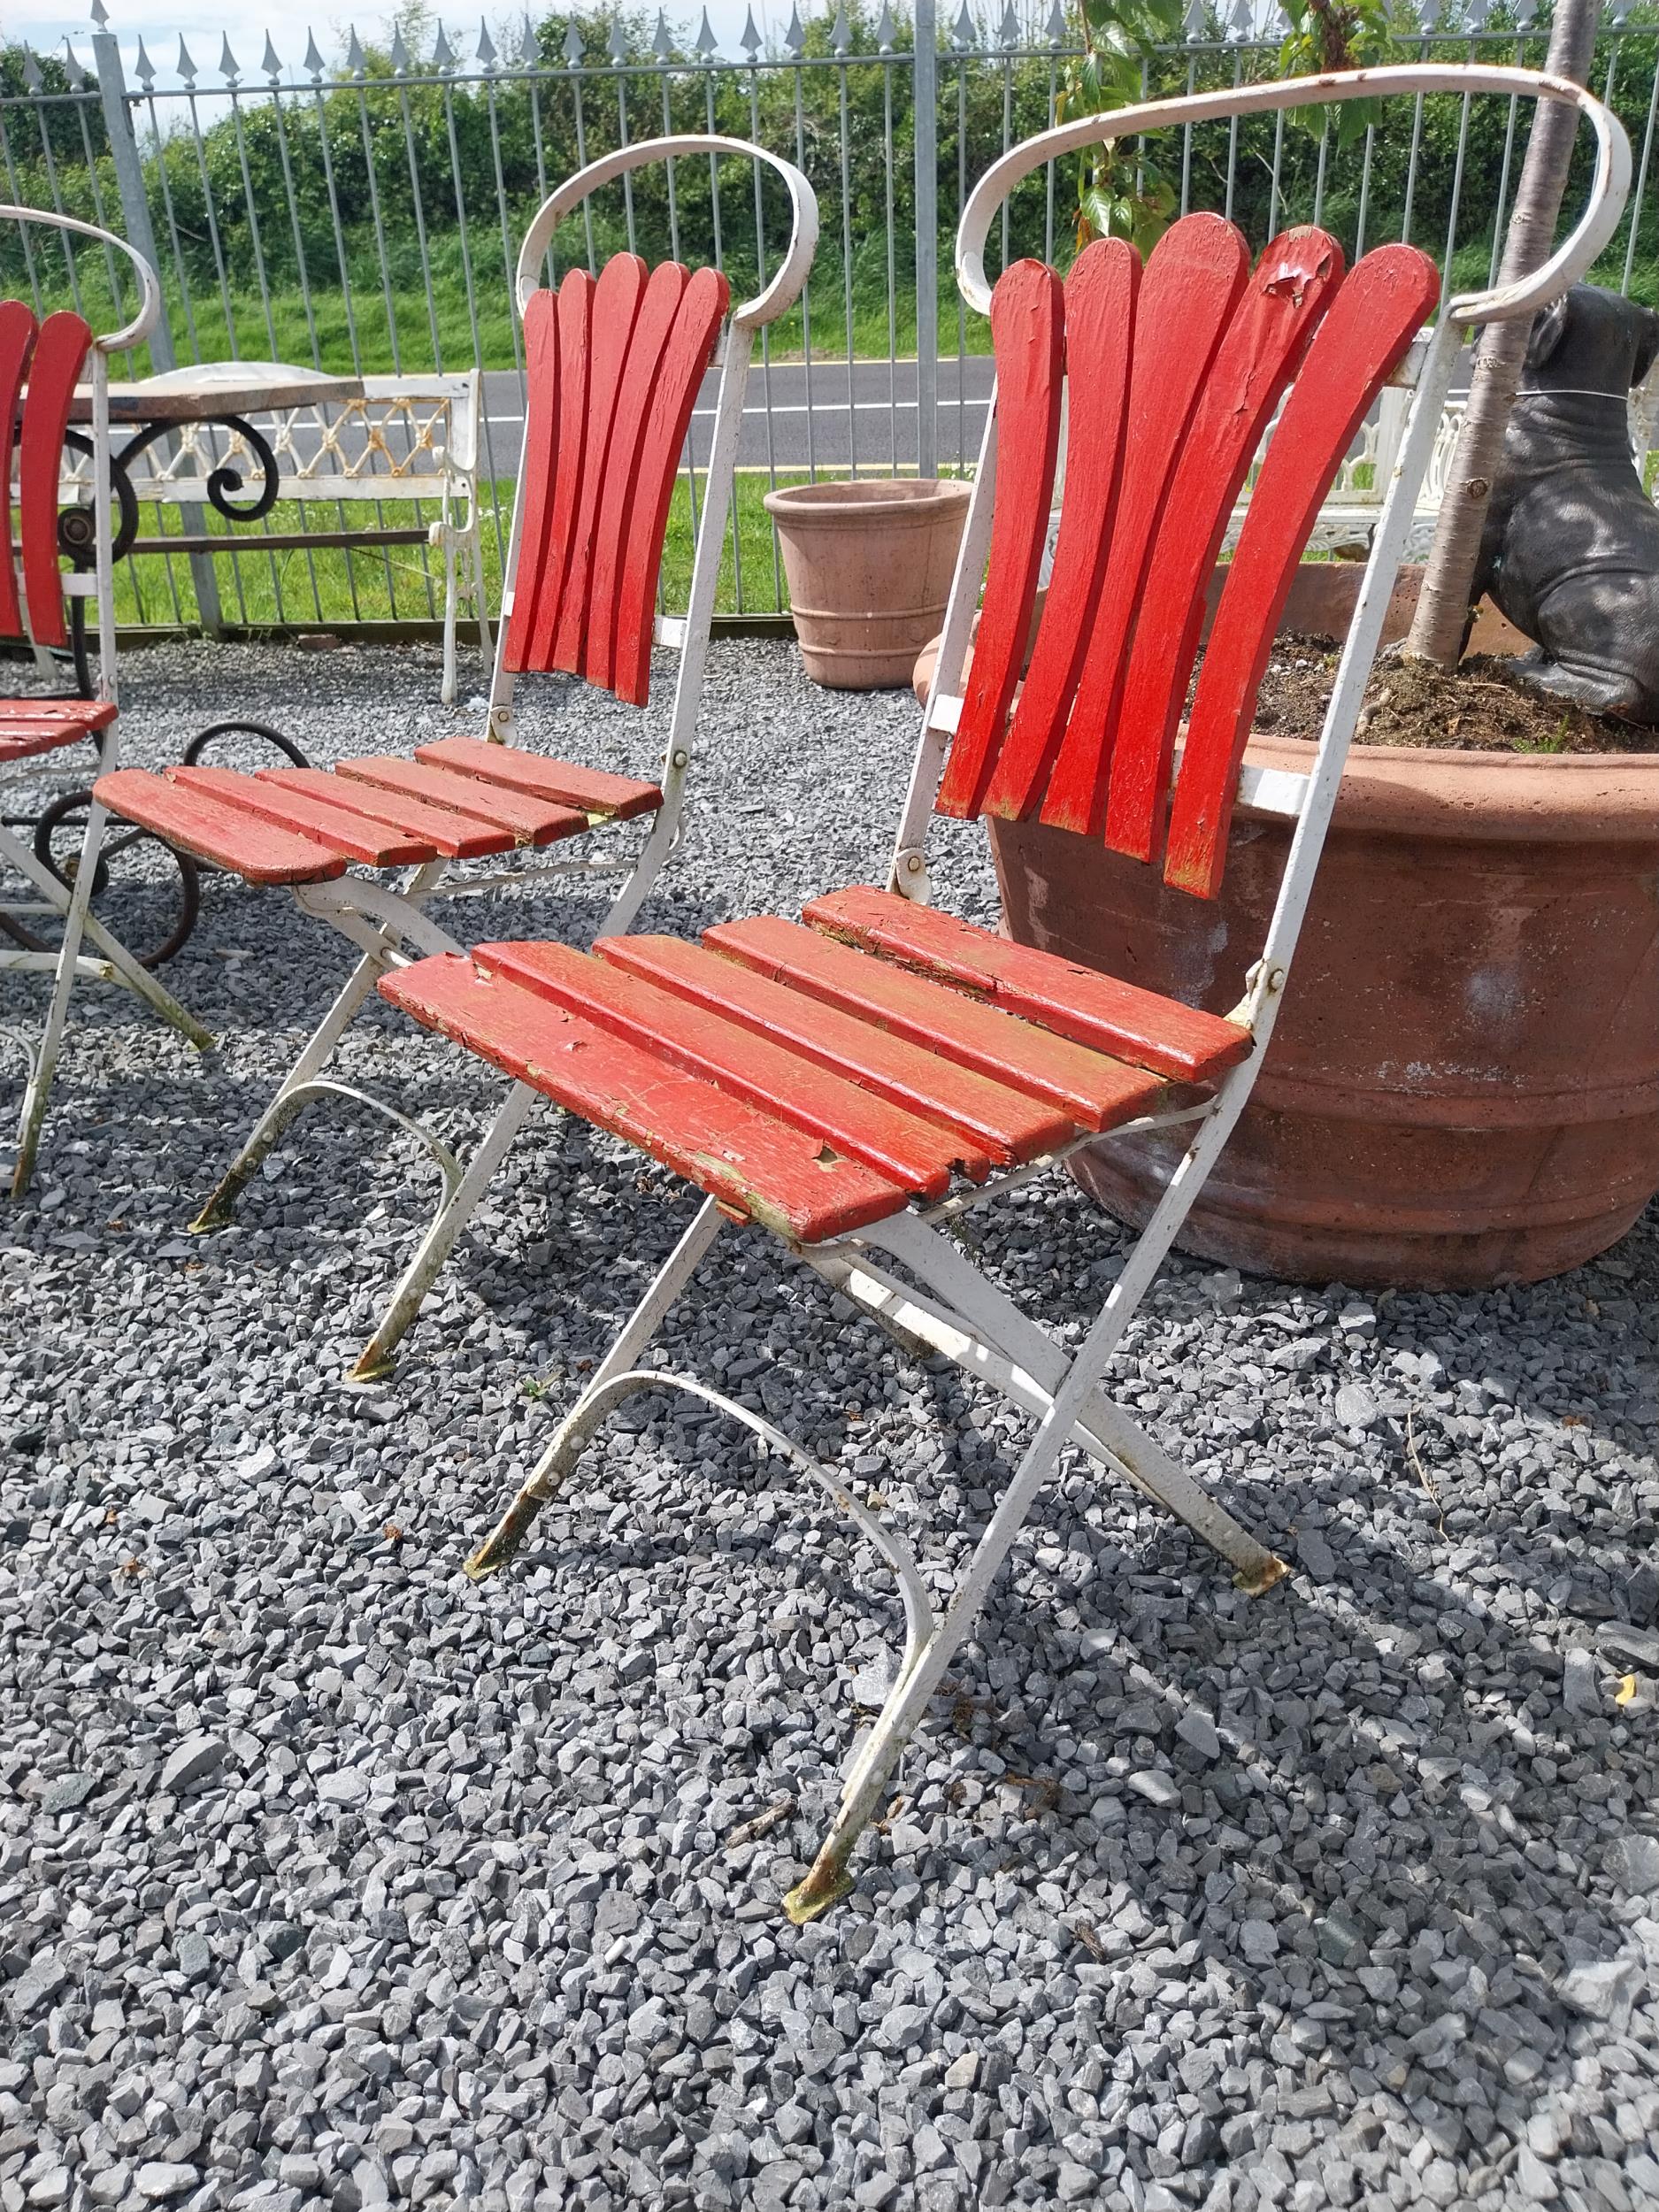 Set of four early 20th C. wrought iron folding garden chairs with wooden slats {90 cm H x 44 cm W - Image 2 of 3